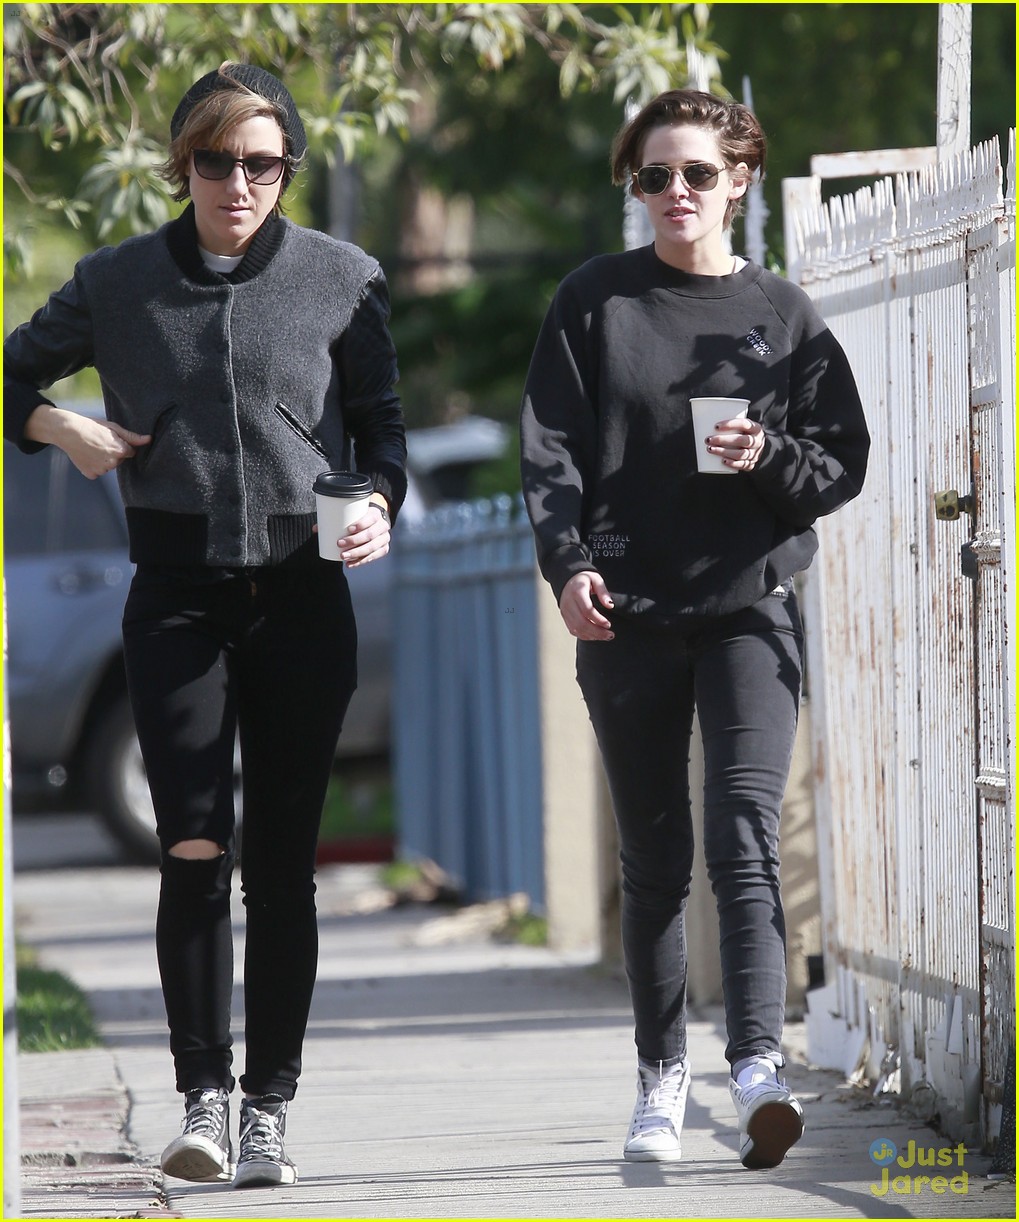 kristen stewart spends sunday smiling with bff alicia cargile 30